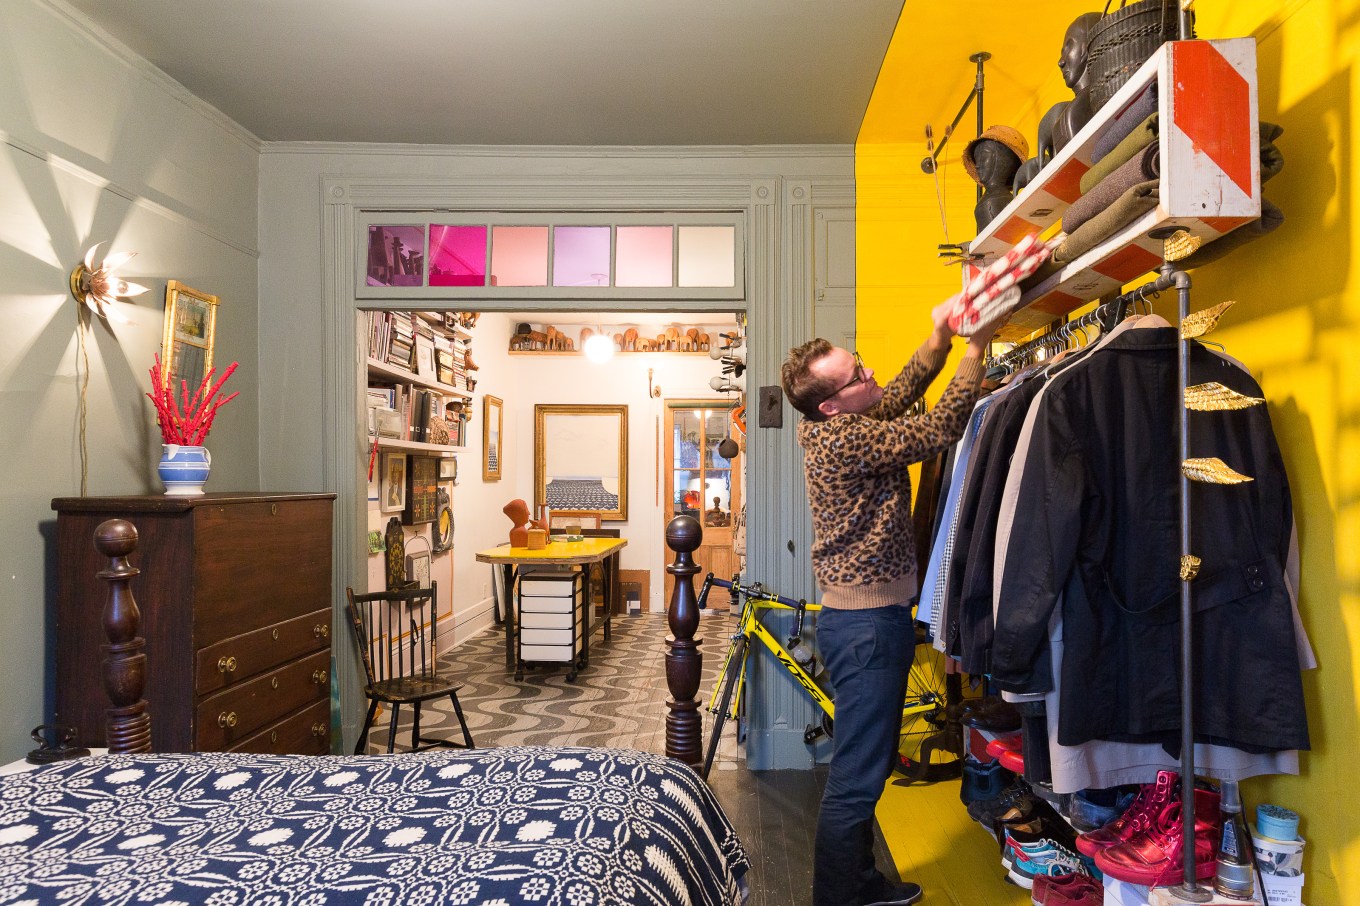 27 Small Bedroom Storage Ideas For Dorms, Apartments, And Tiny Homes